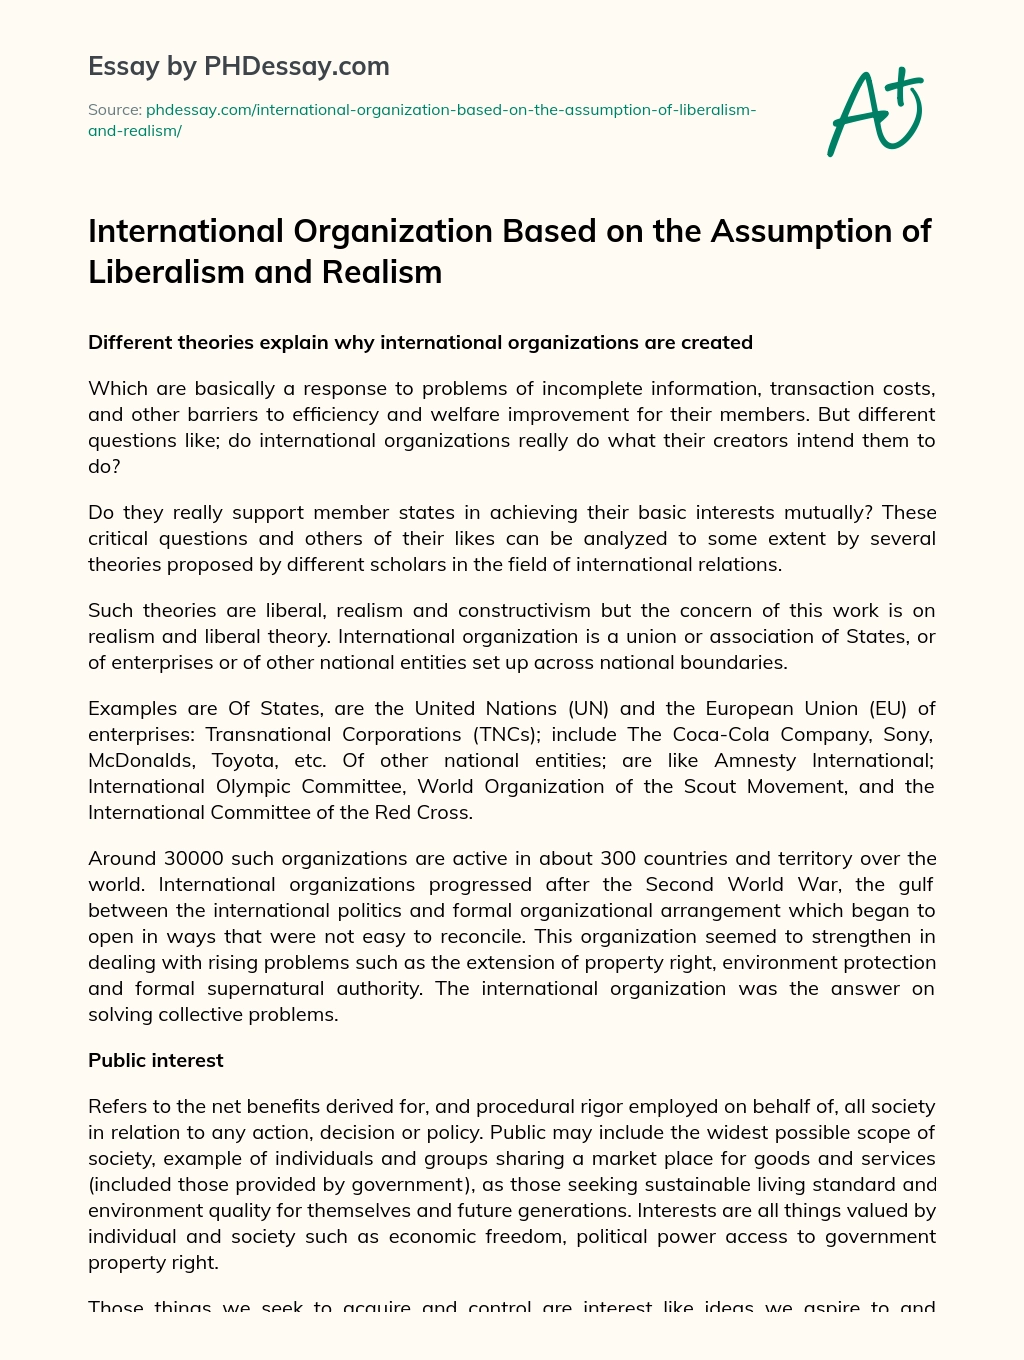 International Organization Based on the Assumption of Liberalism and Realism essay